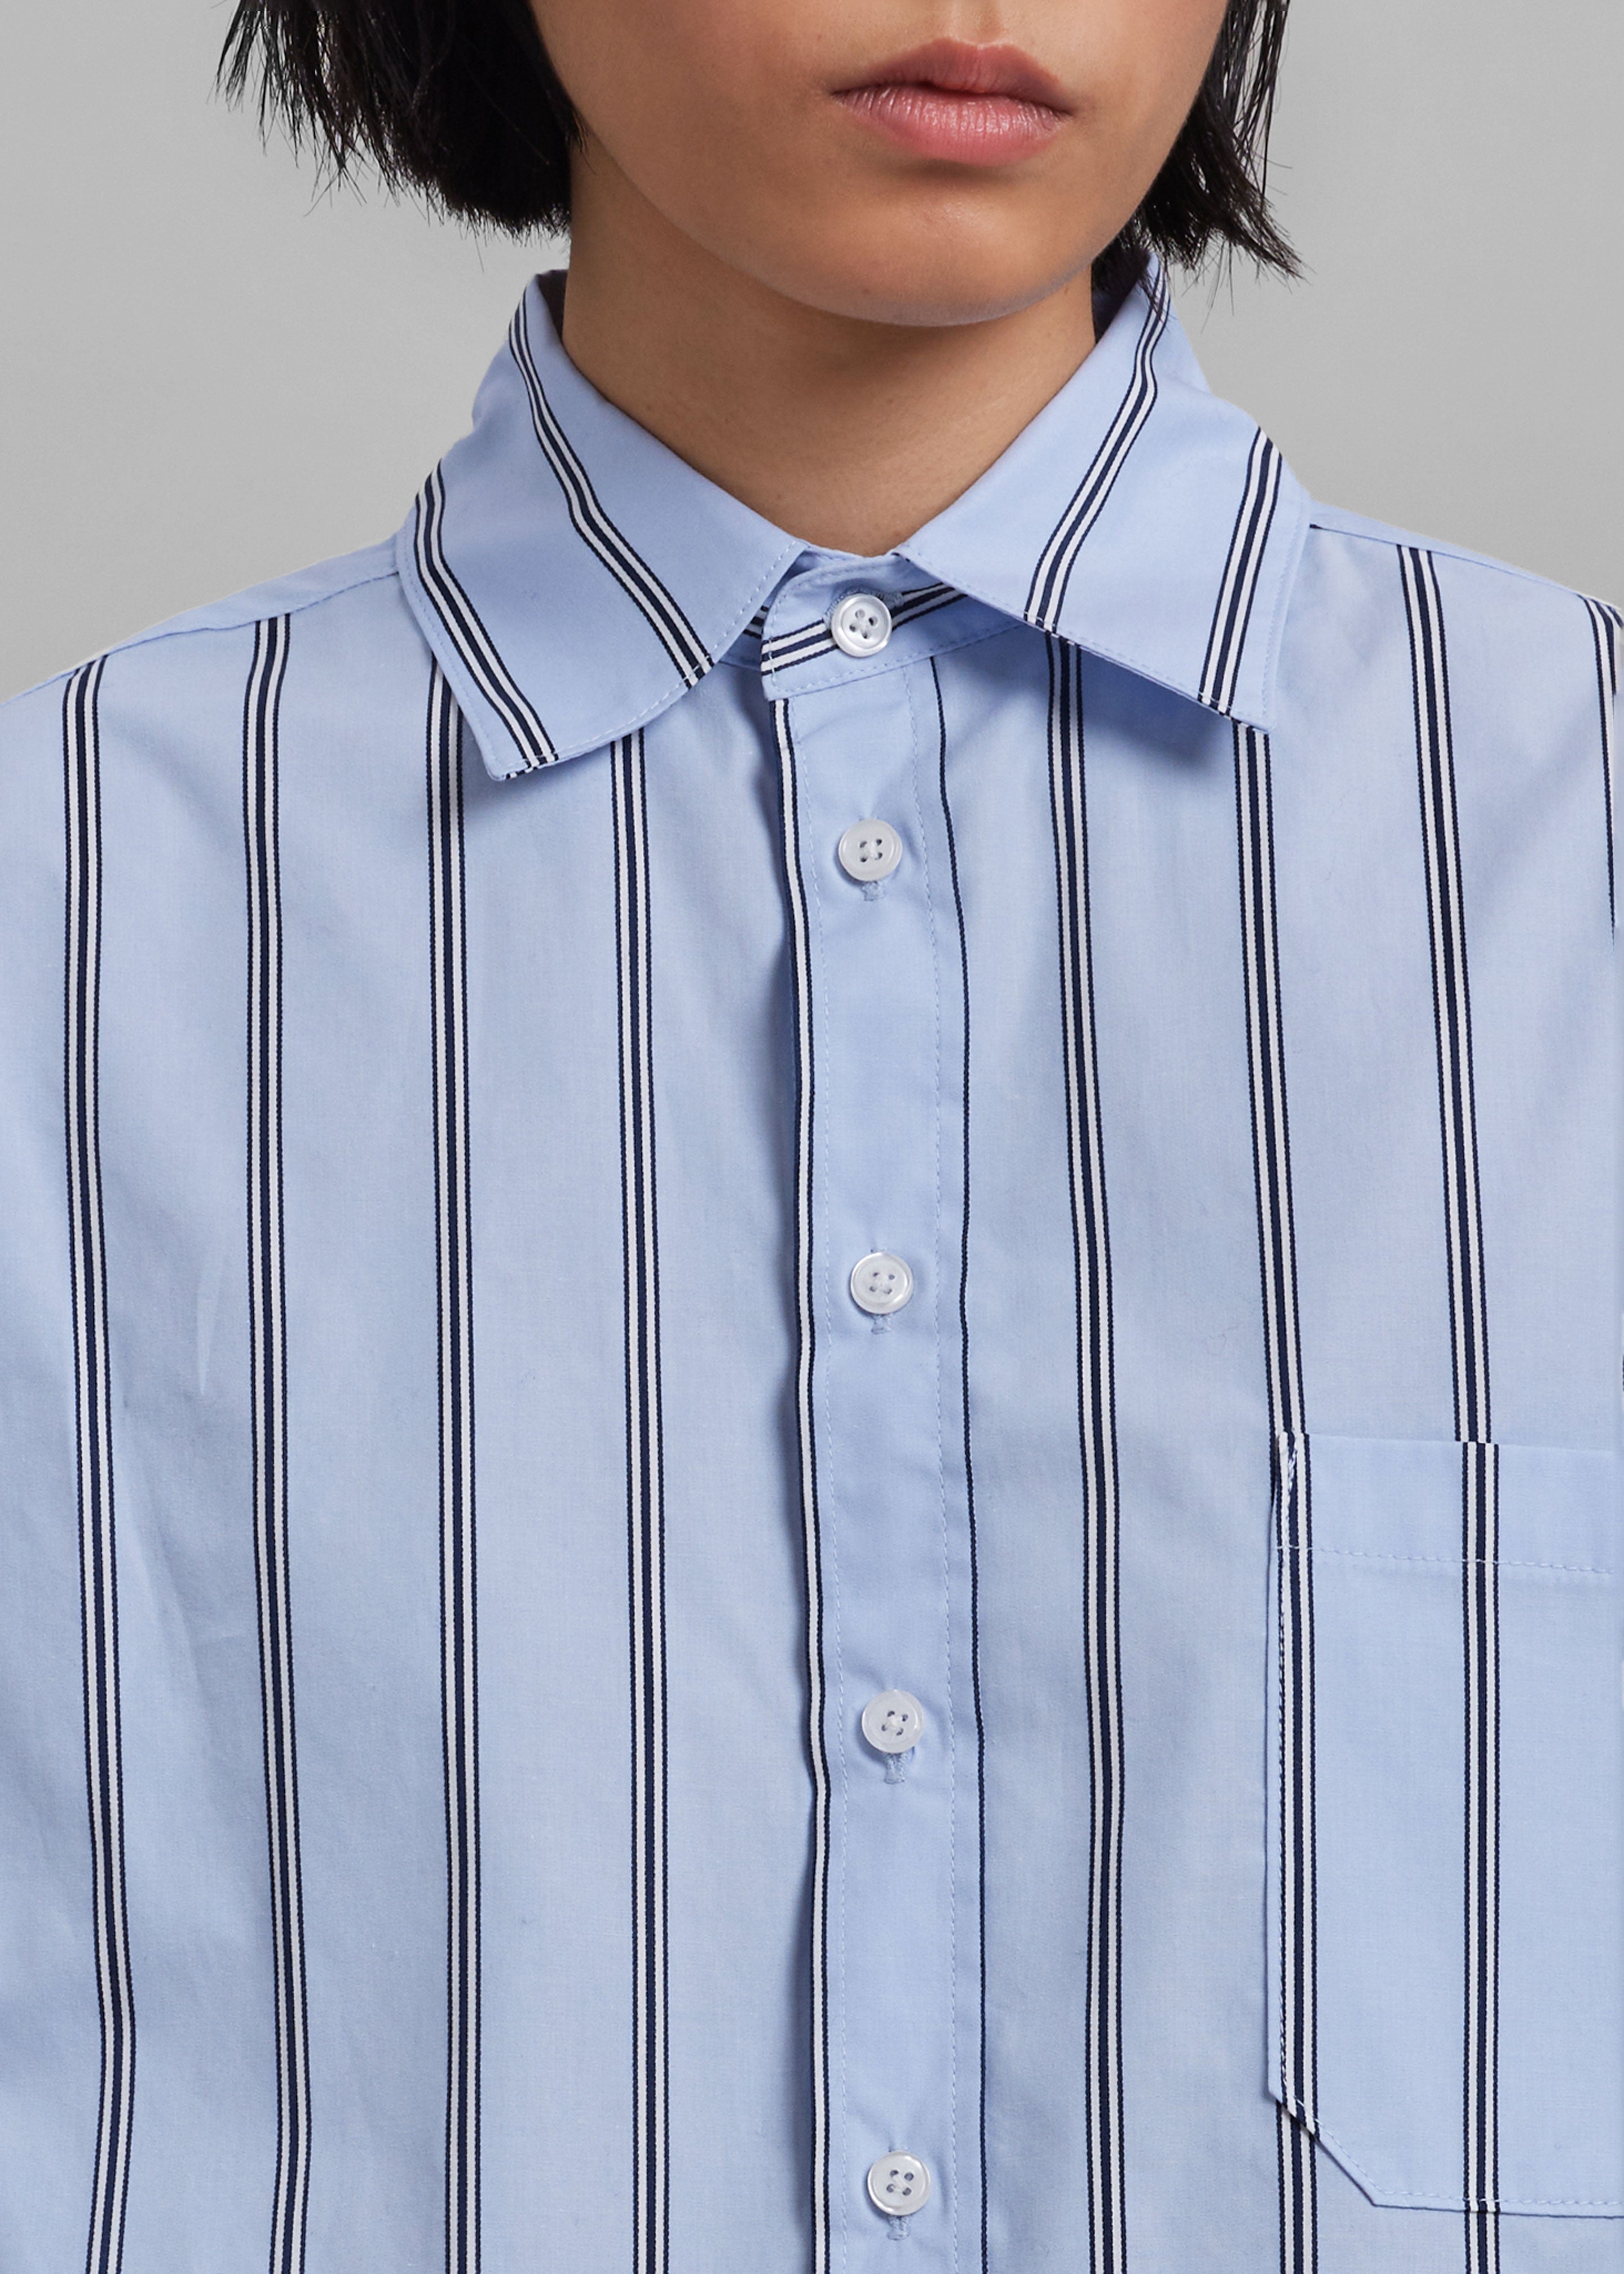 Puppets And Puppets Cronenberg Oversized Striped Button Down Shirt - Blue Stripe - 5